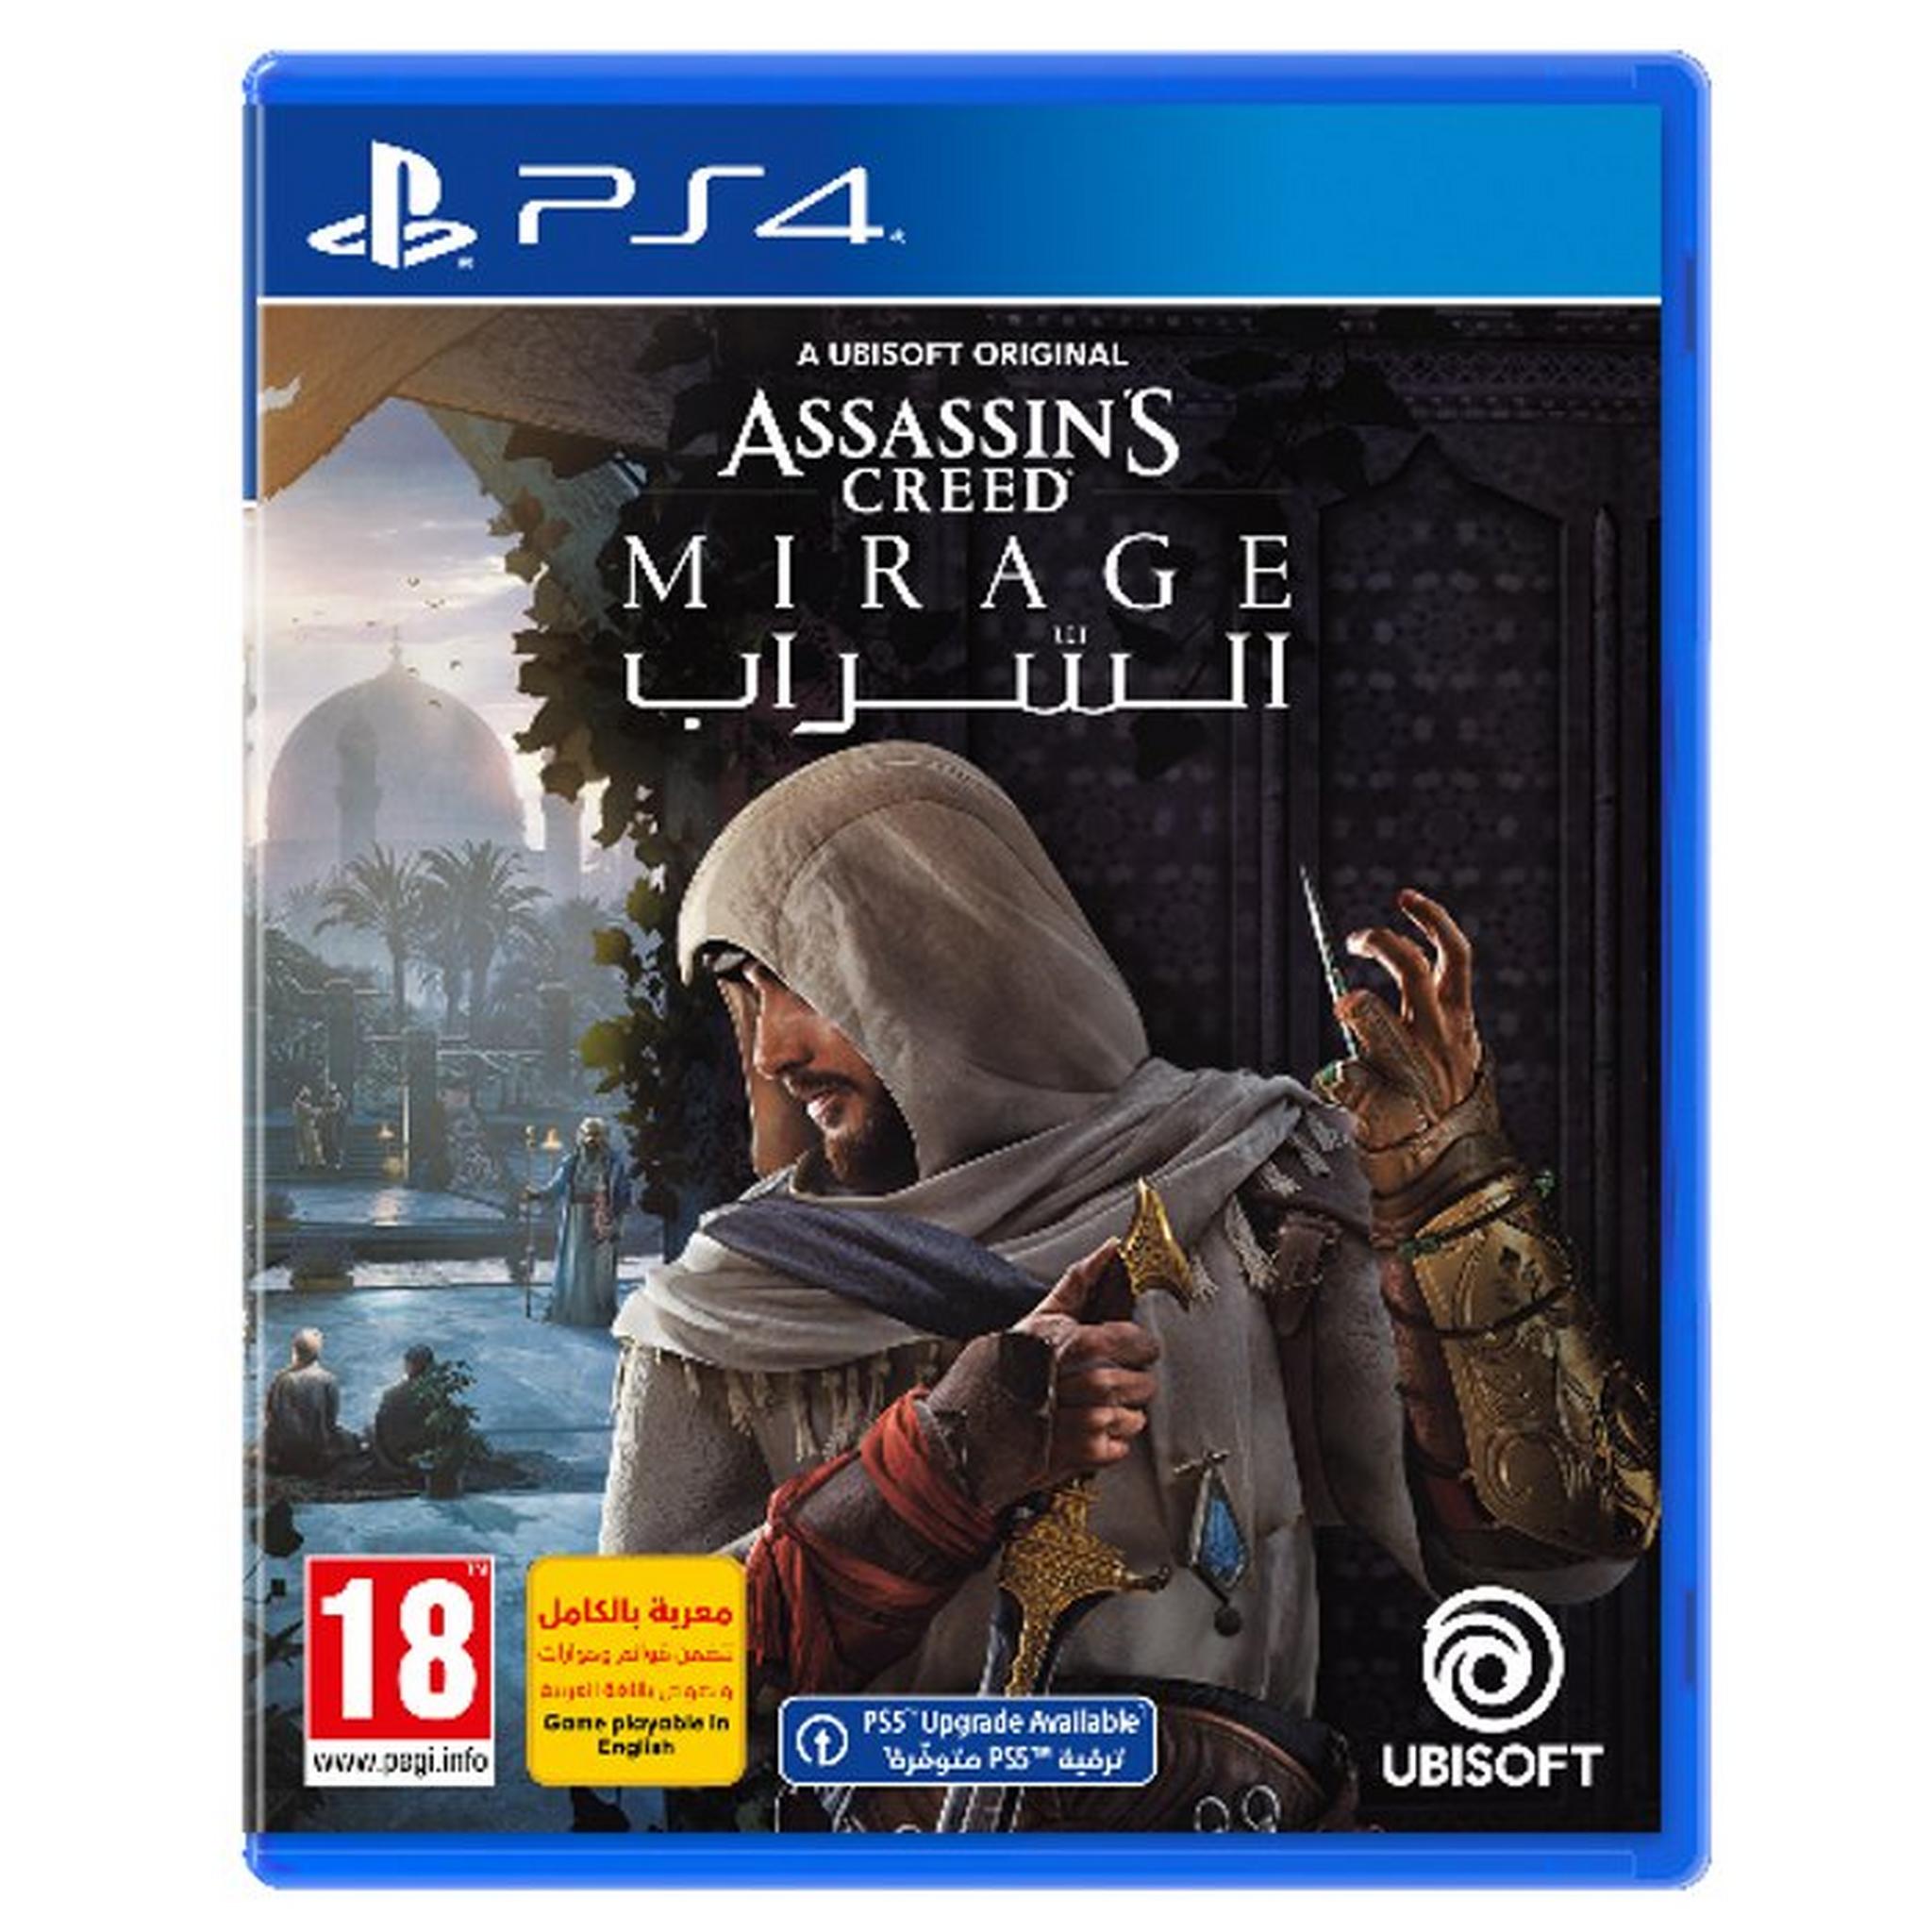 SONY Assassins Creed Mirage Standard Edition  PlayStation 4 Game - PS4-ACM-STD